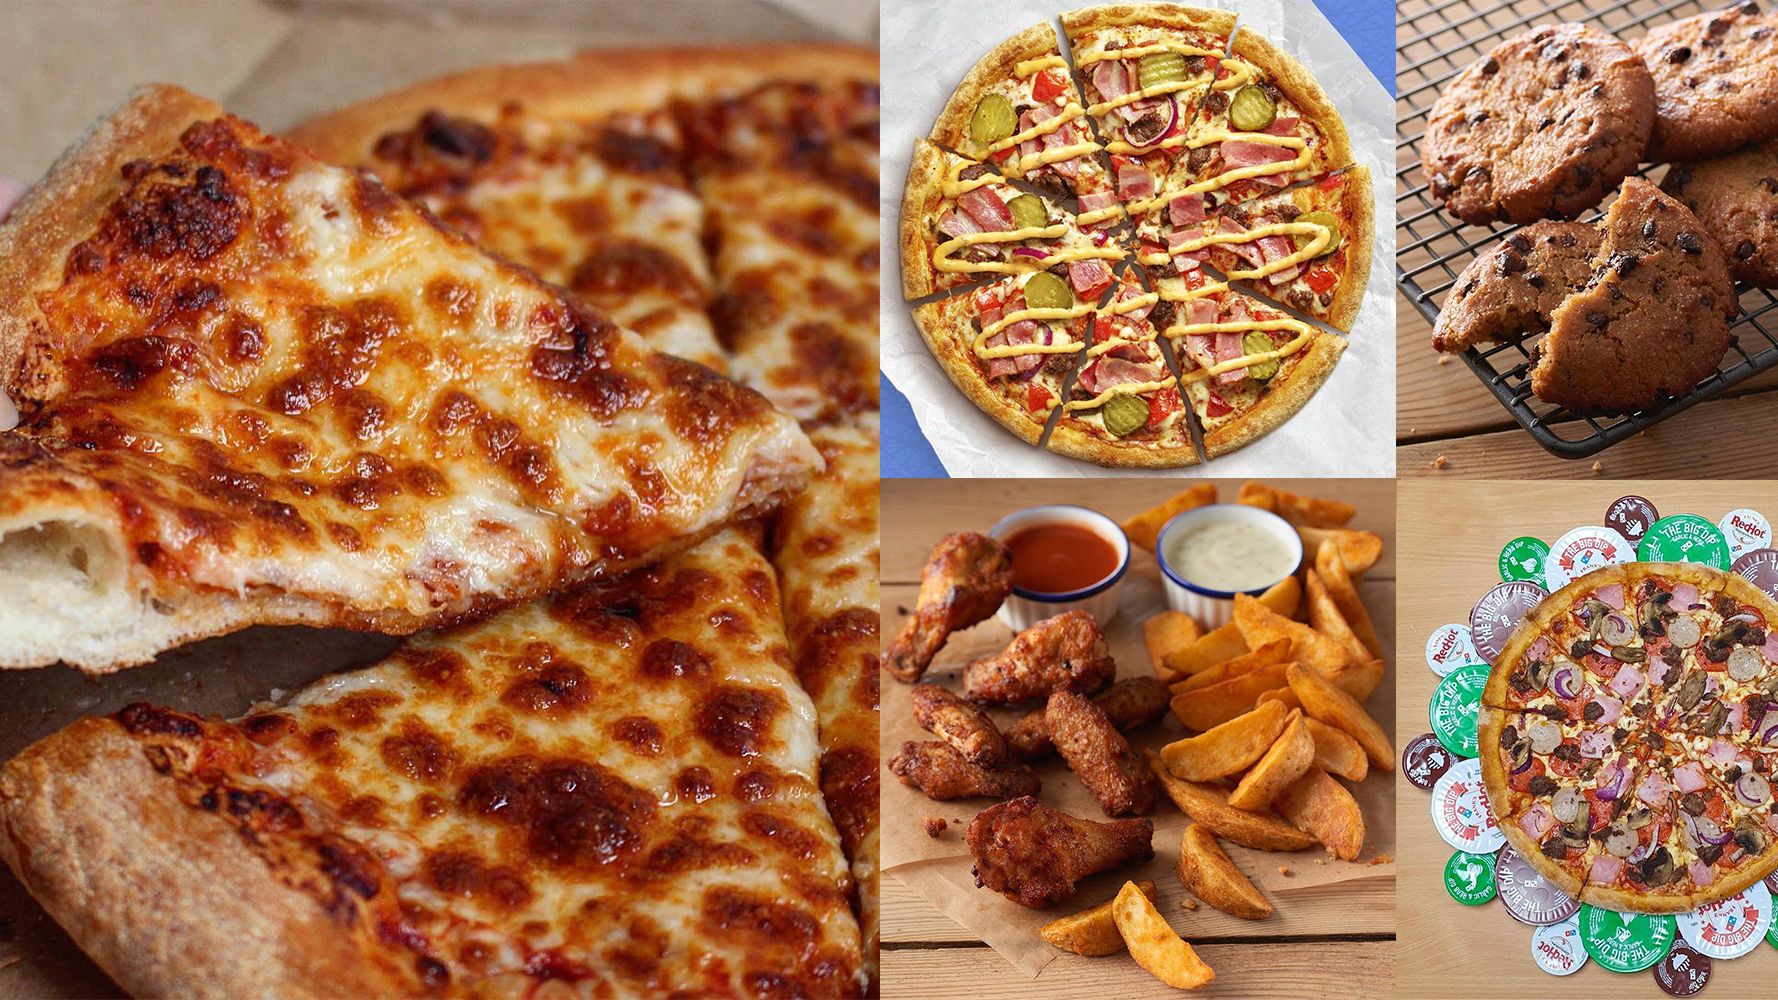 Domino's Pizza Menu Ranked: From Pepperoni Passion To Garlic